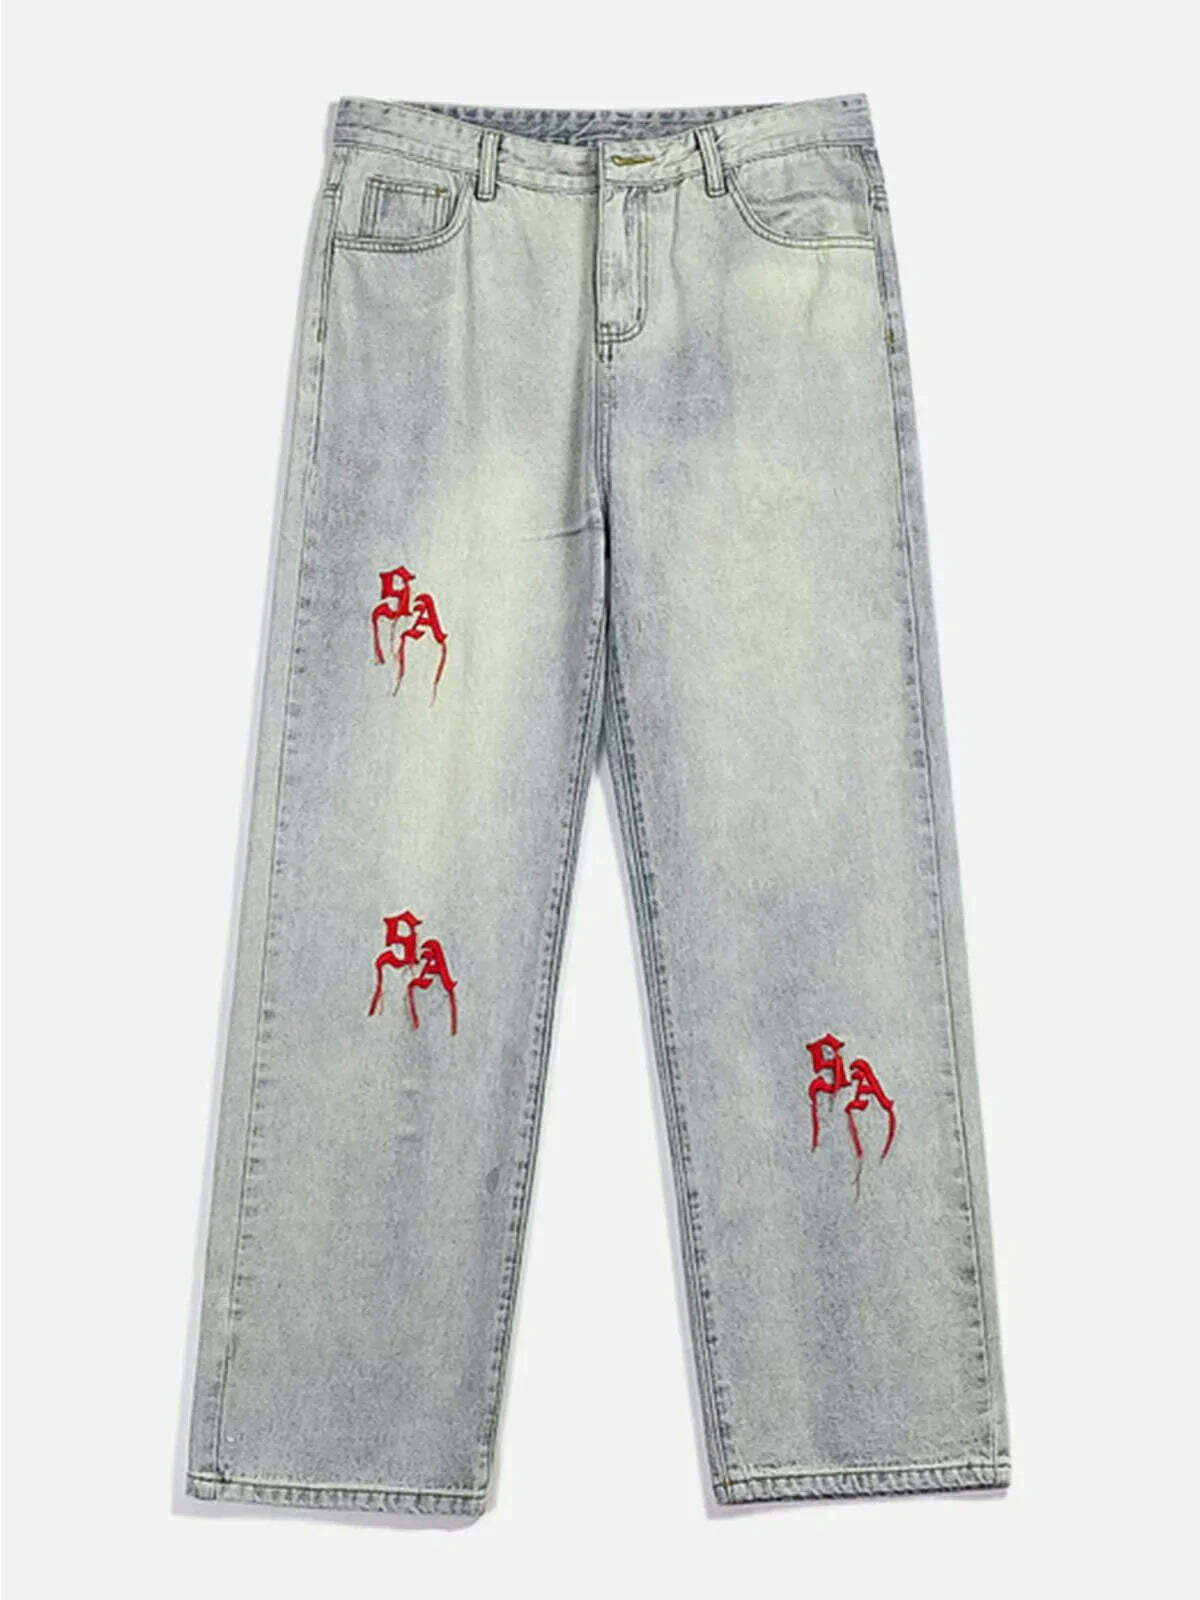 3d embroidered letter jeans edgy & trendy streetwear 2647